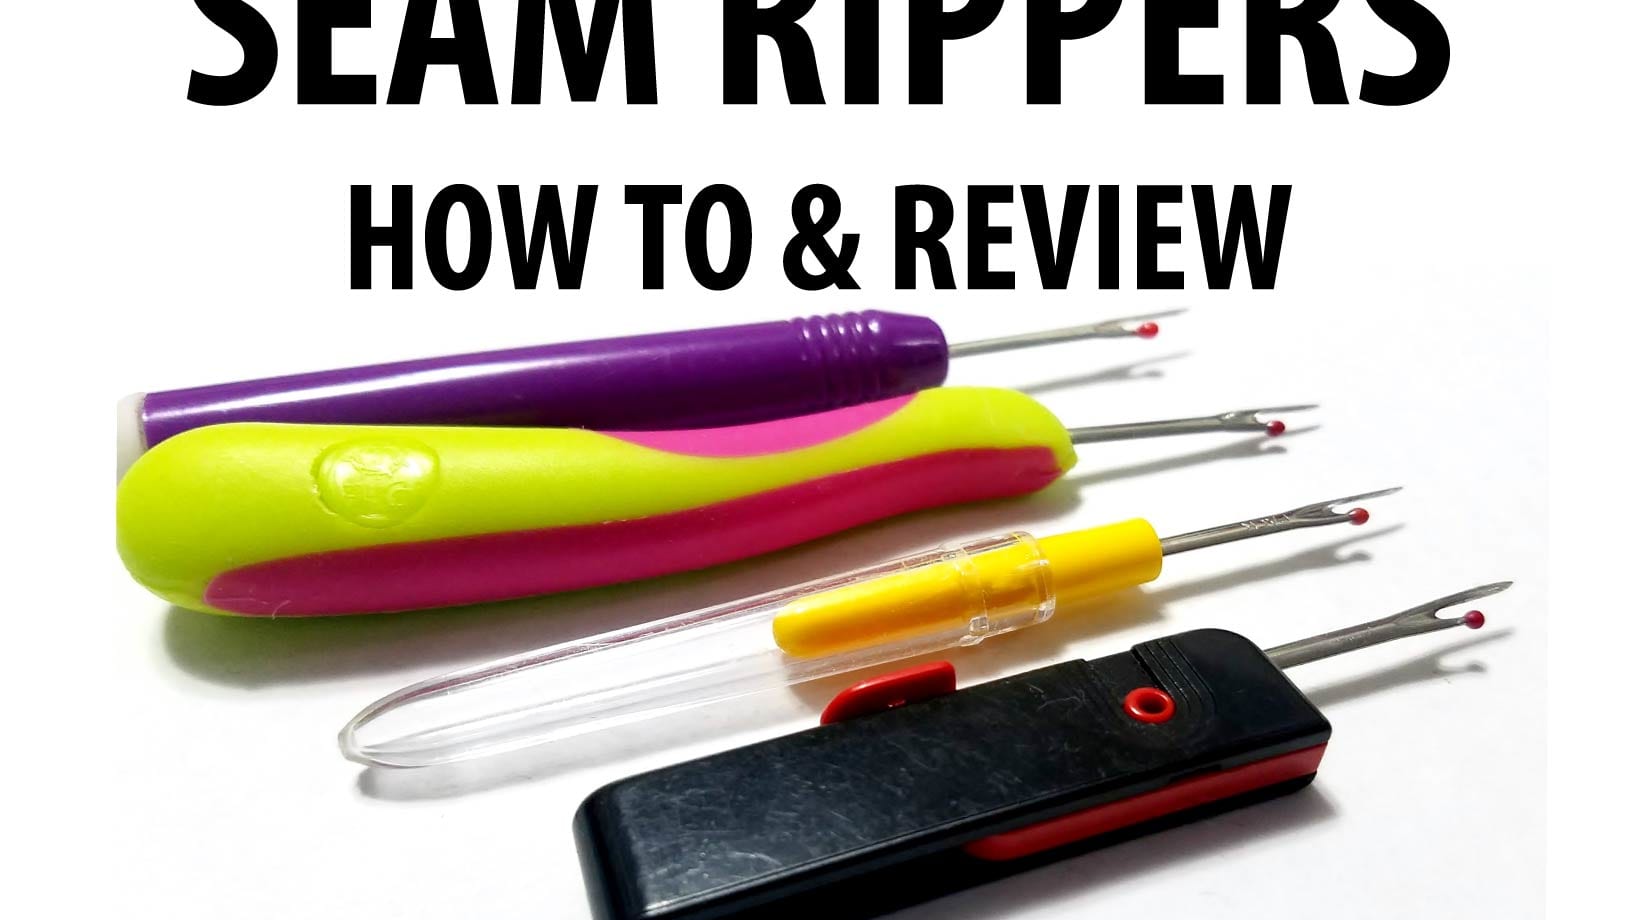 Notions and Tools: Picking the Perfect Seam Ripper - Fabric Ninja